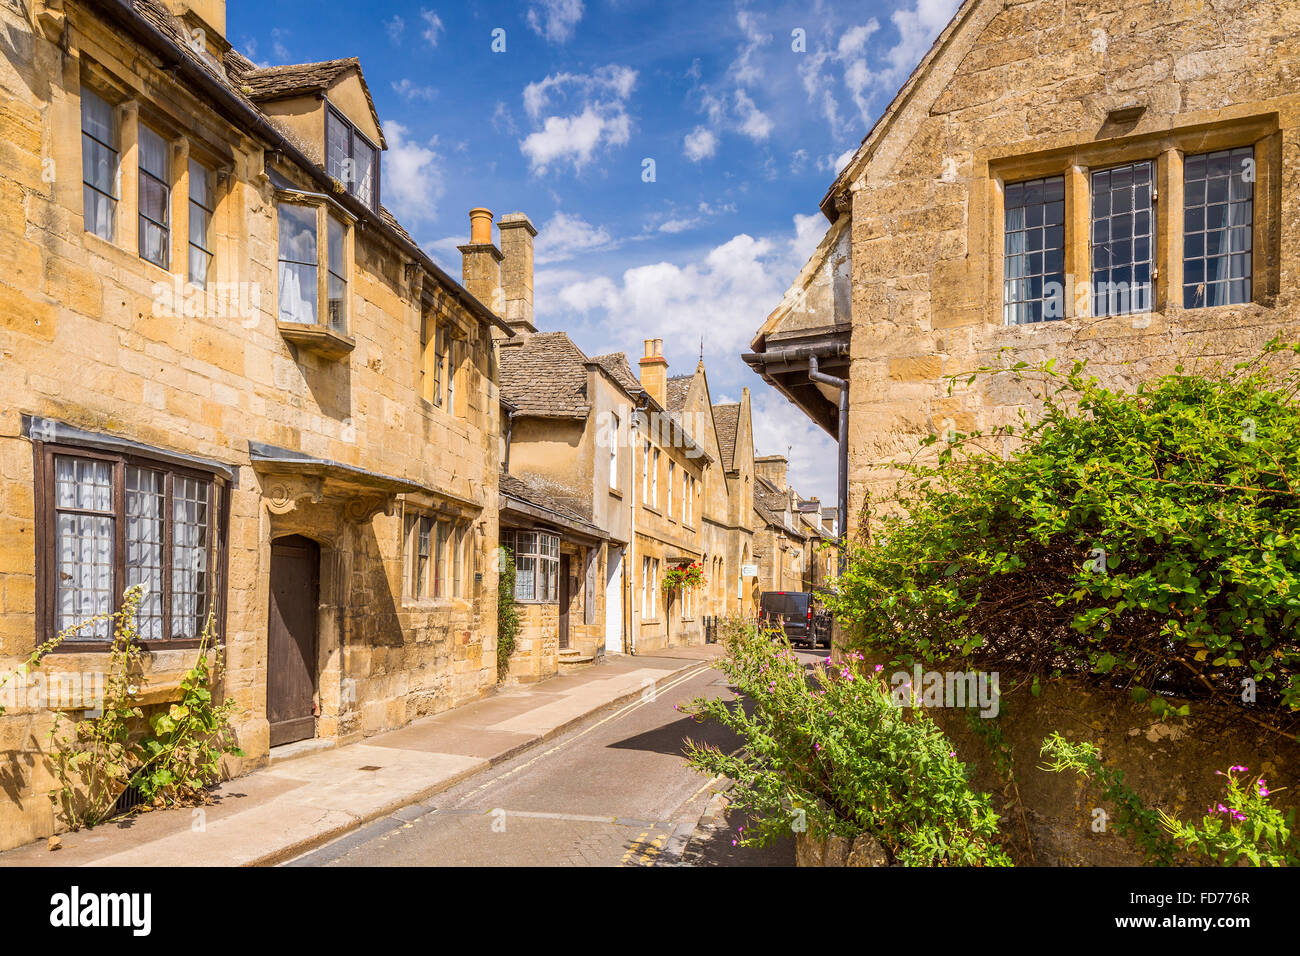 Chipping Campden, Cotswolds, Gloucestershire, England, Regno Unito, Europa. Foto Stock